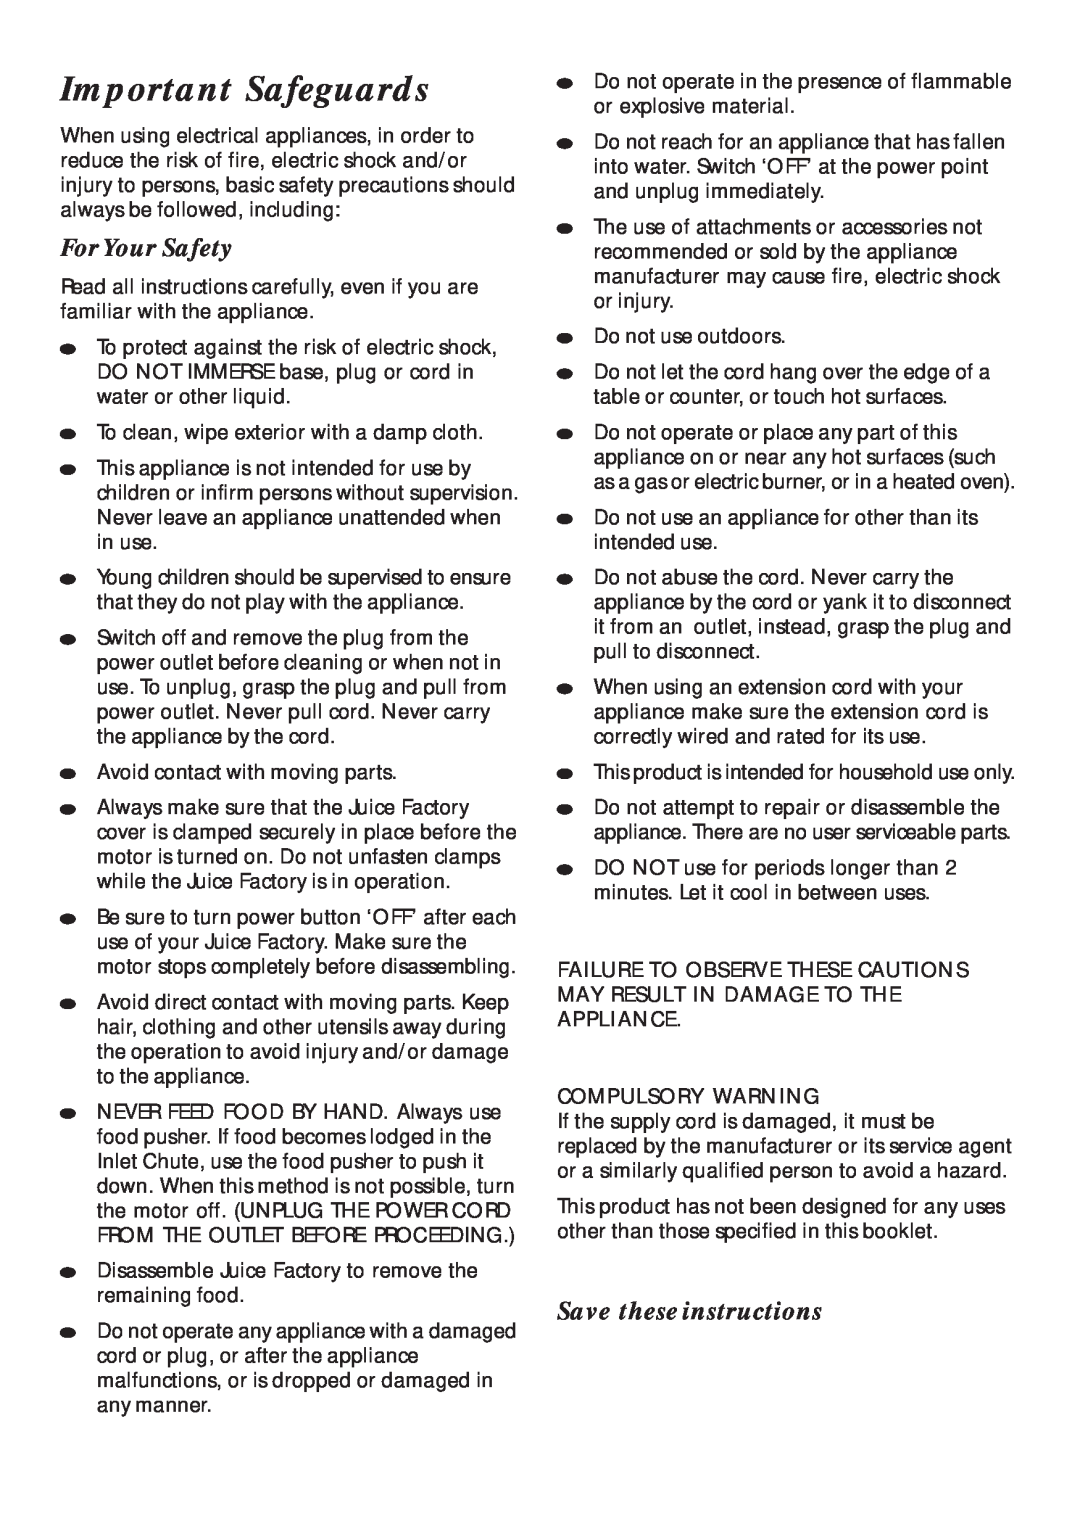 Mistral MJF50 manual Important Safeguards, For Your Safety, Save these instructions, Compulsory Warning 